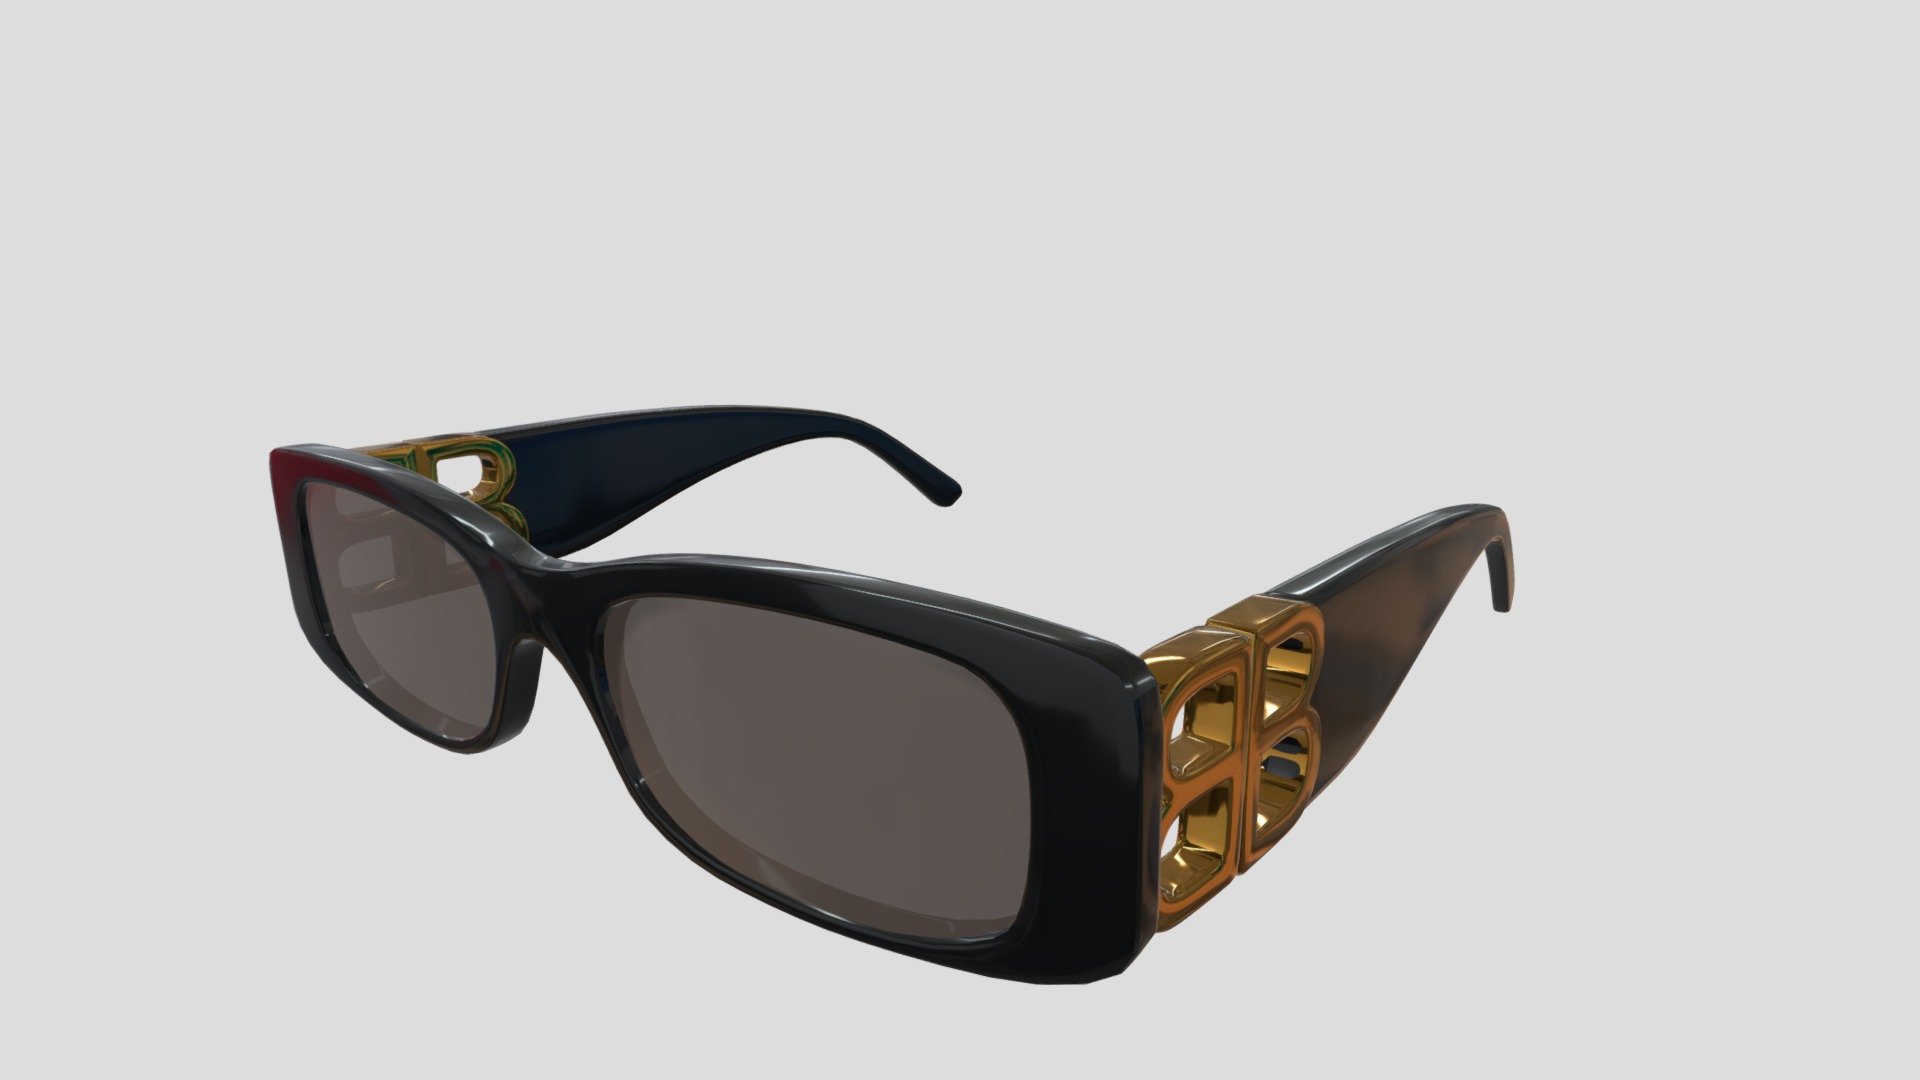 High-quality low poly model of fashion sunglasses with black plastic frame and gray lenses. Ideal for close-up renders and photo-realistic scenes 3d model